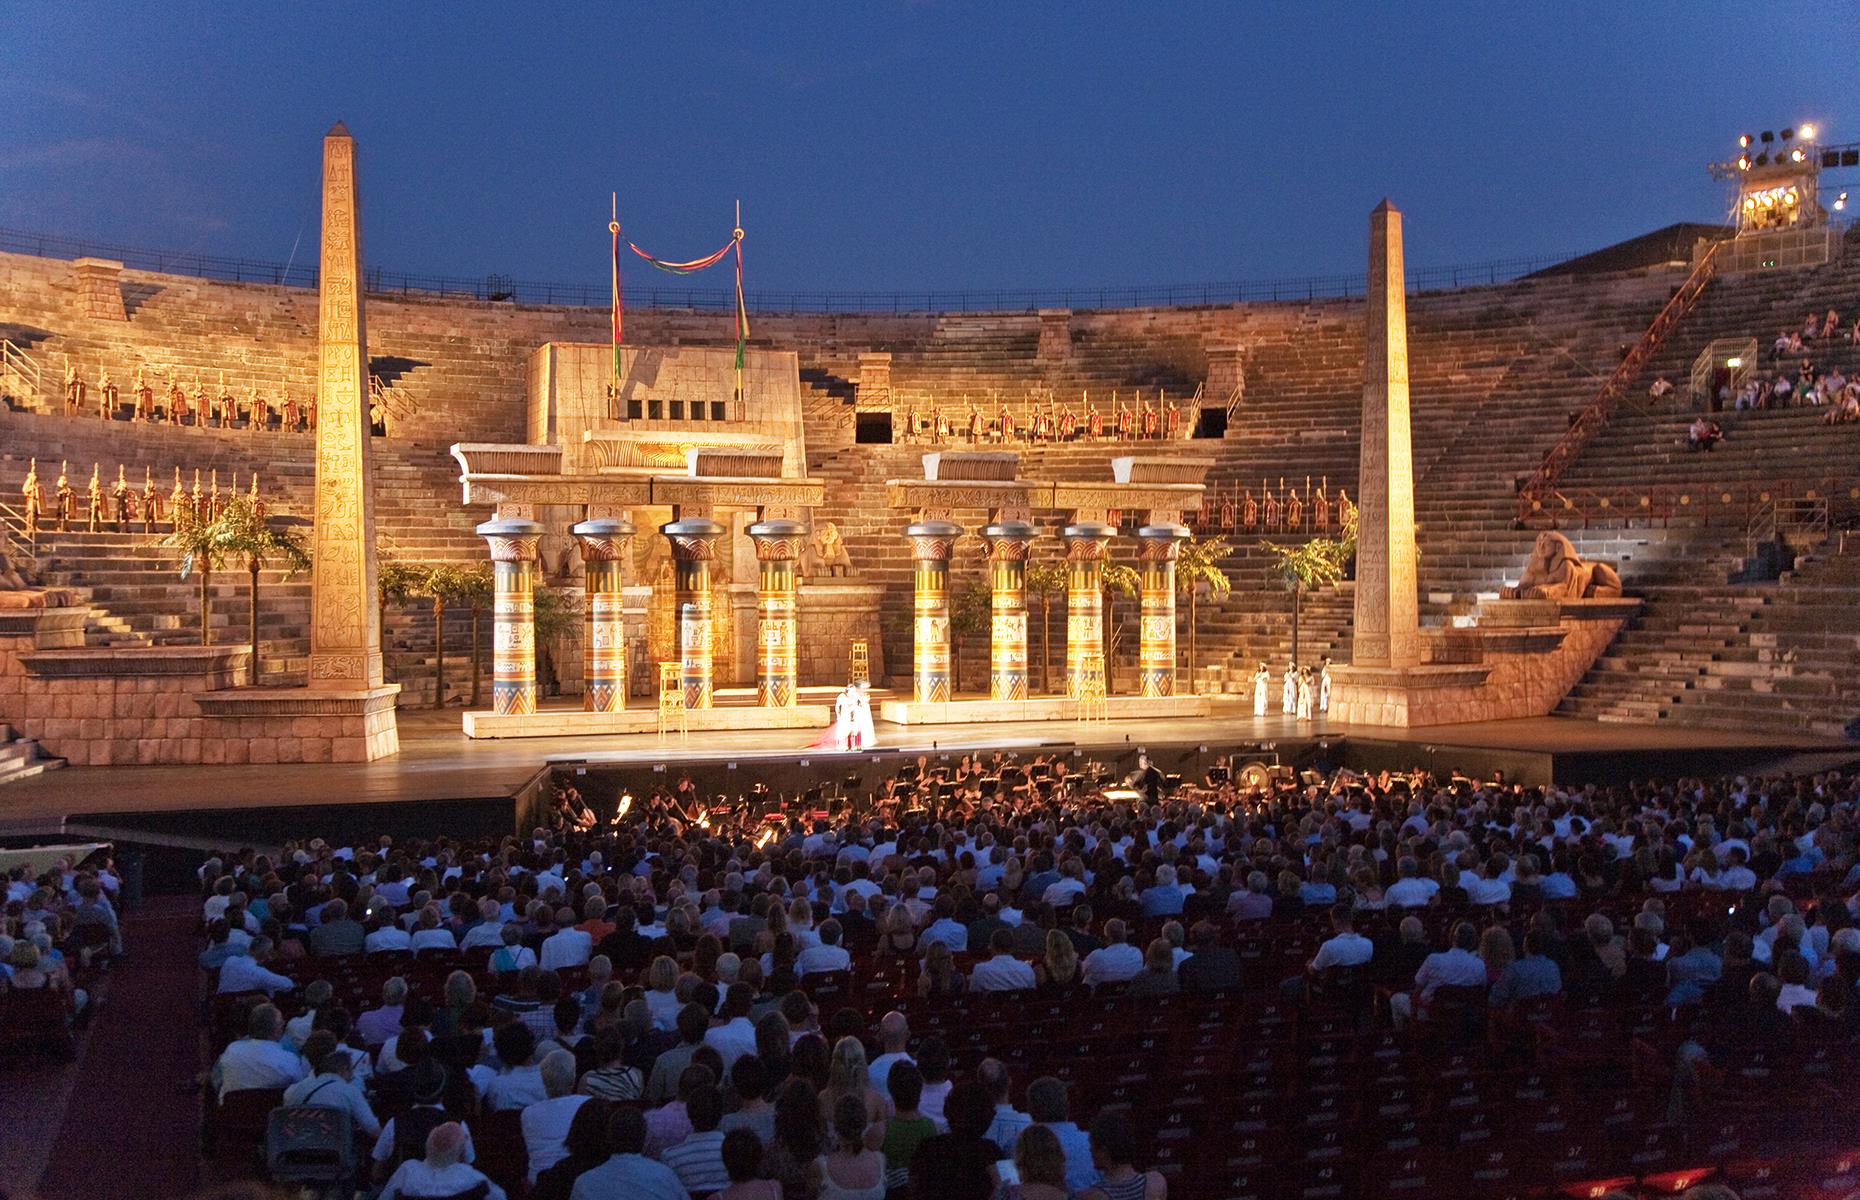 Round off a stay in fair Verona with a night of opera under the stars. The Arena di Verona Opera Festival runs from June to September each year and takes place in the original Roman arena, dating from the 1st century AD. Nowadays it plays host to big-name 21st-century acts as well as classical opera. Either way, you’re in for a rousing, memorable night.